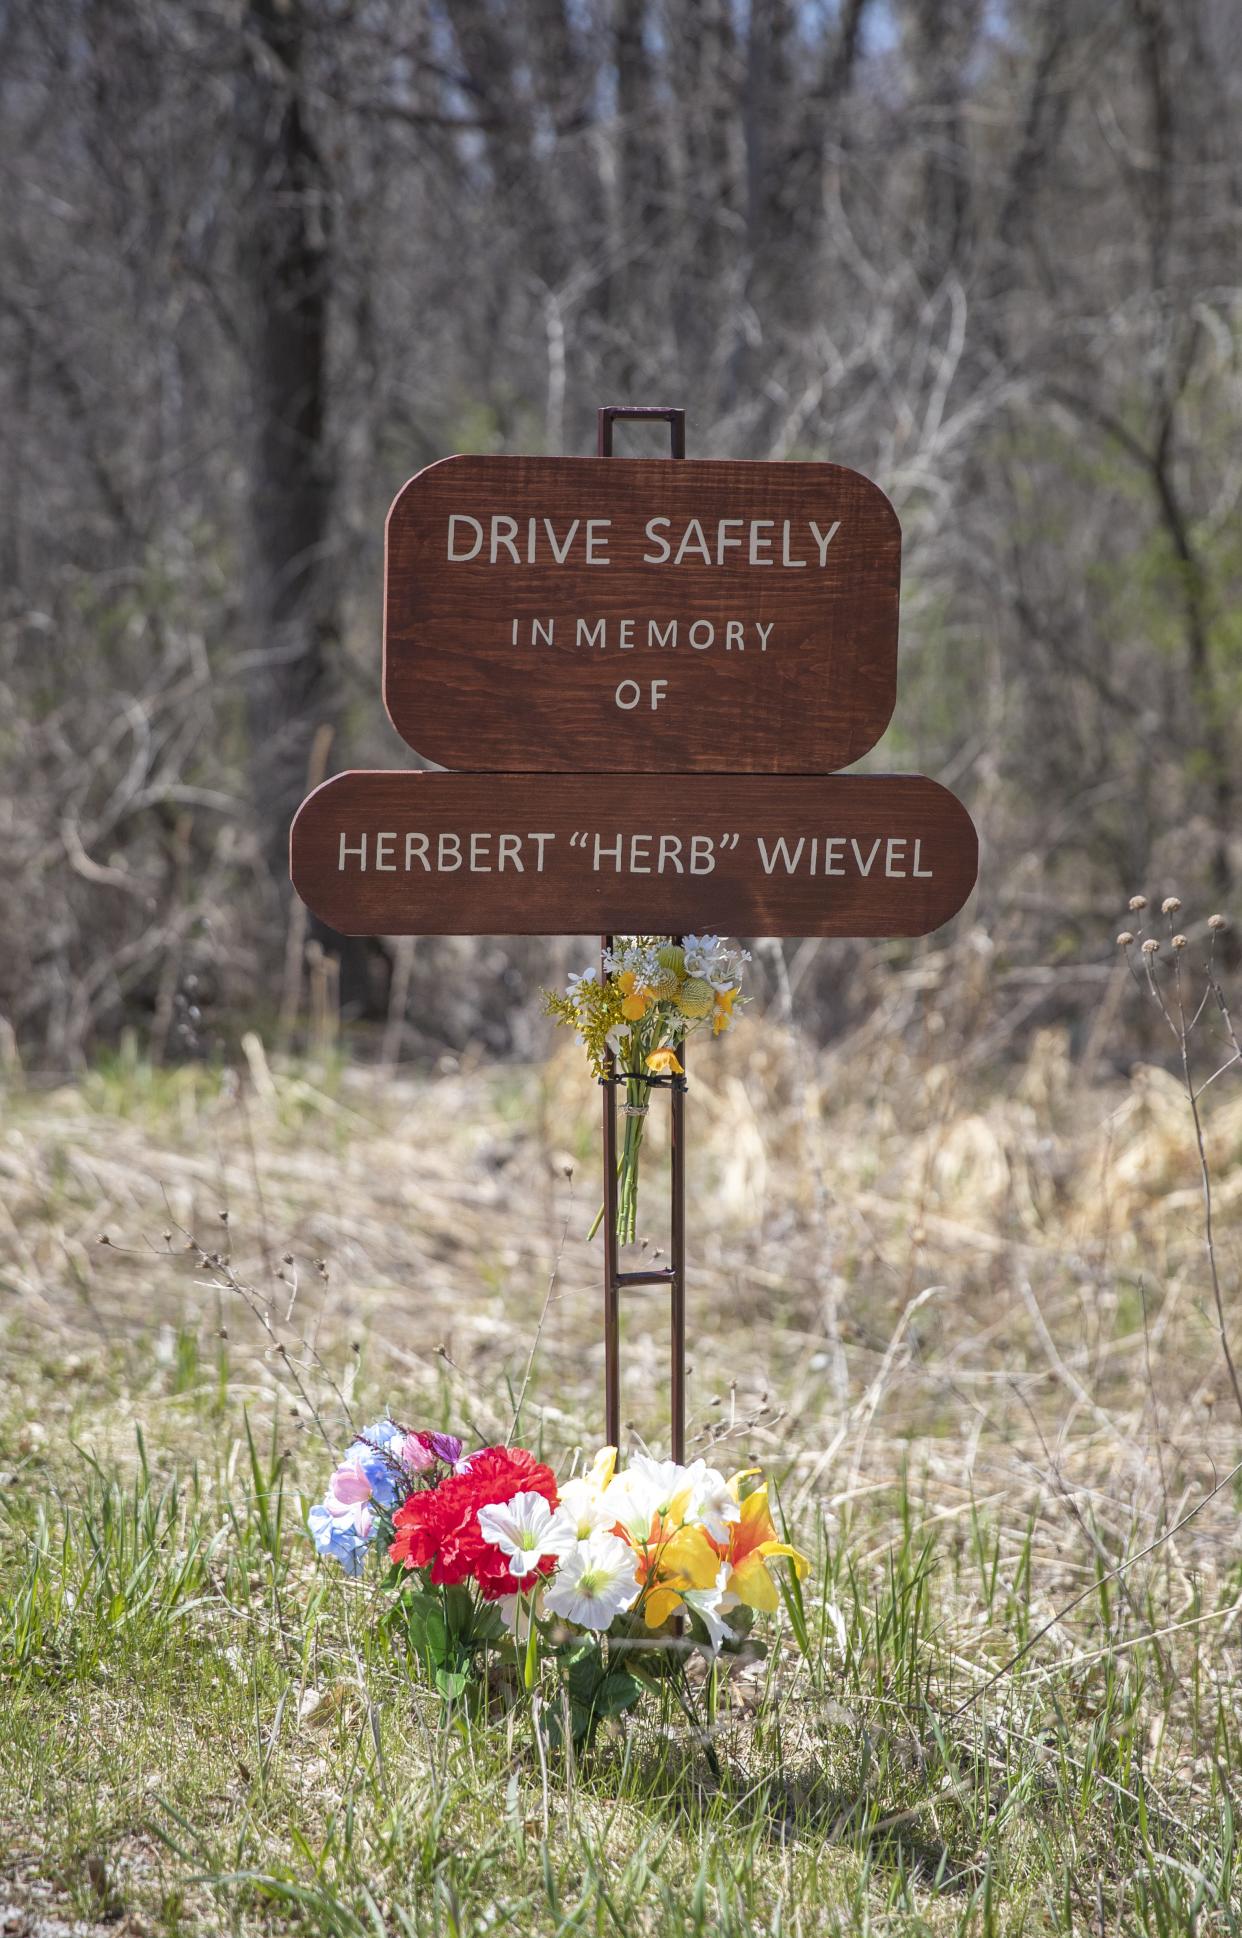 On a tight curve of West River Drive, near Portage County HH, in Stevens Point,  stands a memorial to Herbert Wievel, a 63-year-old Stevens Point man who died in early March 2024, after being hit by a driver who left the scene. Neighbors placed the memorial as well as other signs urging people to drive safely in honor of Wievel.